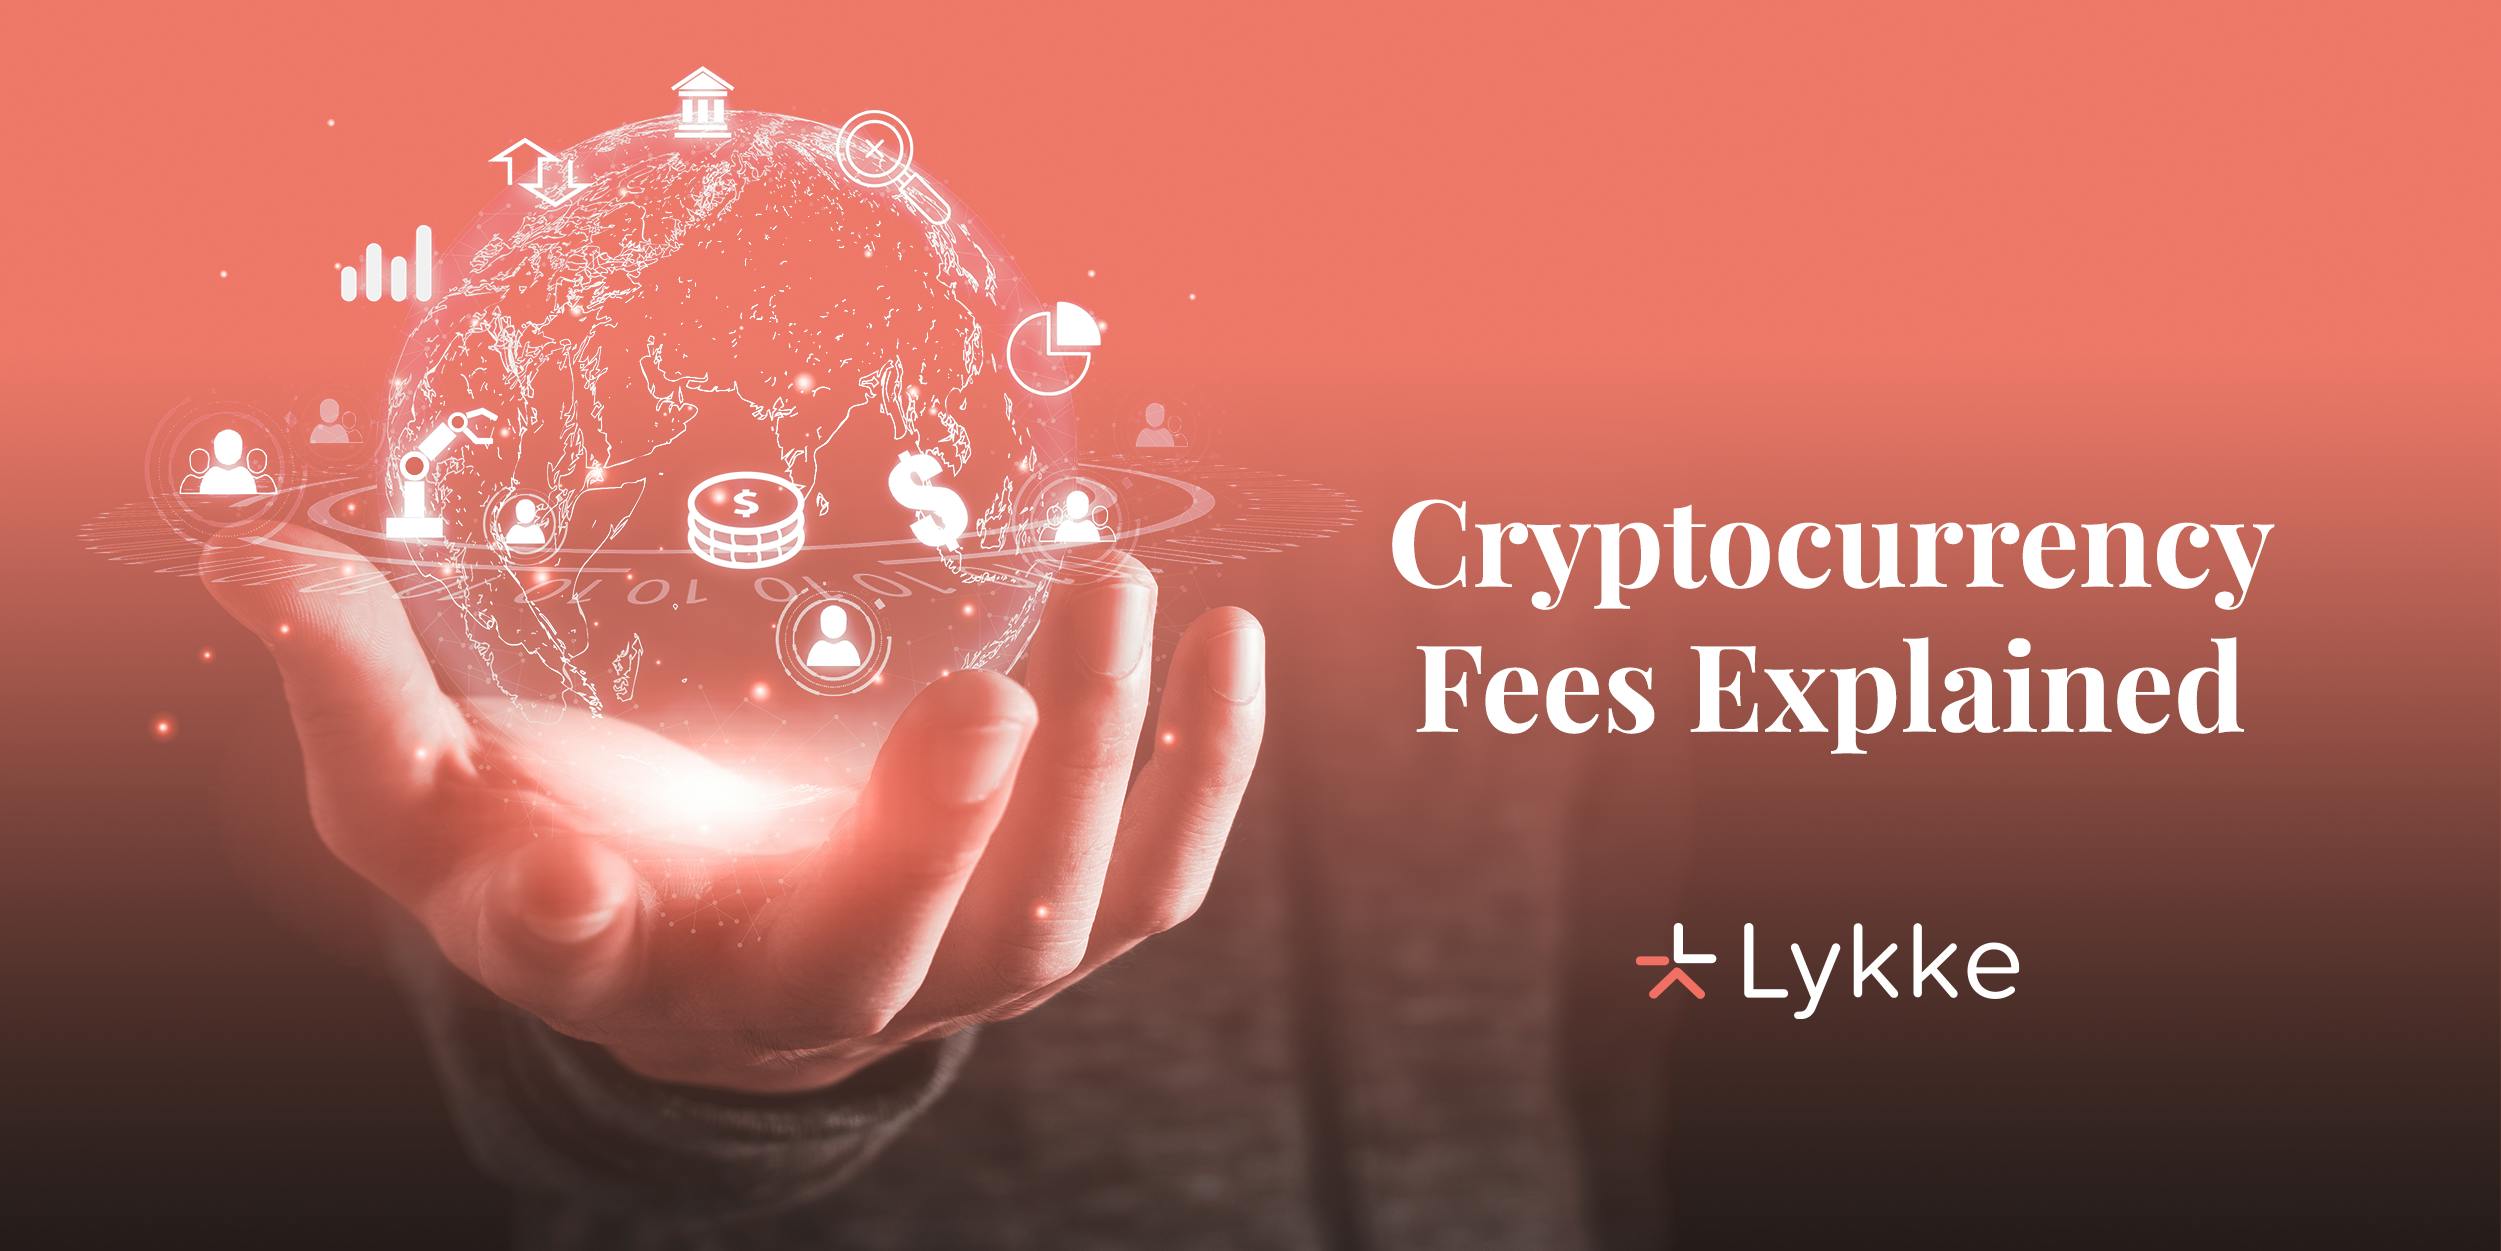 Crypto fees explained: all types of fees for cryptocurrency trading